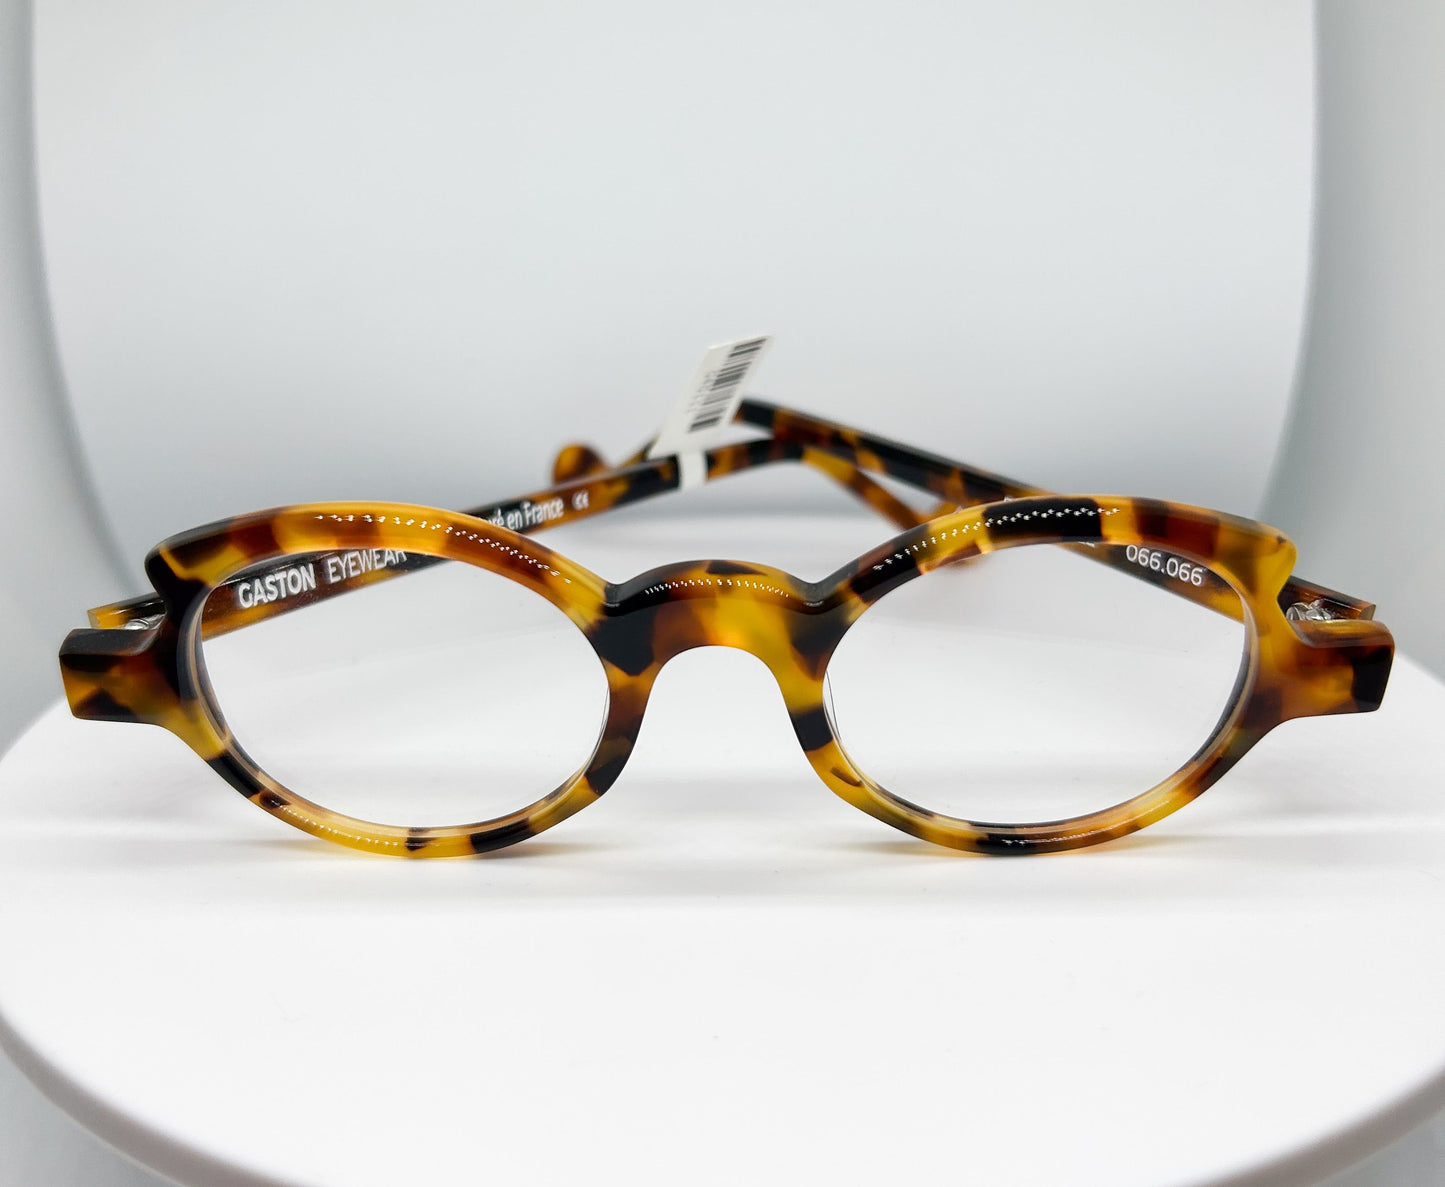 Buy Gaston Eyewear - Belleville, a  Light Tortoise; Acetate Optical Frame with a Round shape. An Authorized Dealer, Adair Eyewear has a 40+ Years History of Customer Service Excellence